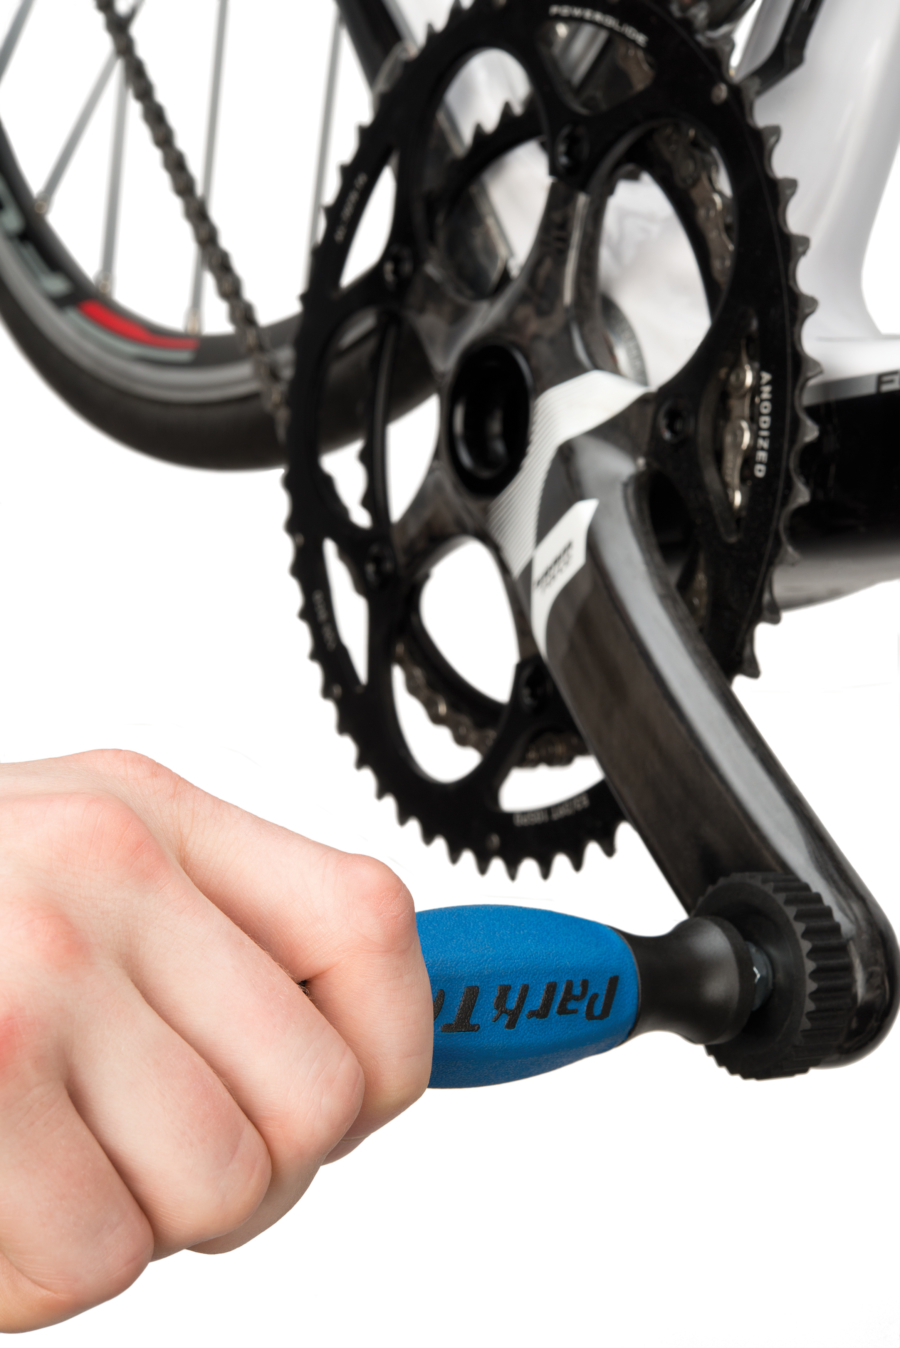 The Park Tool DP-2 Threaded Dummy Pedal installed on SRAM® force crank, enlarged